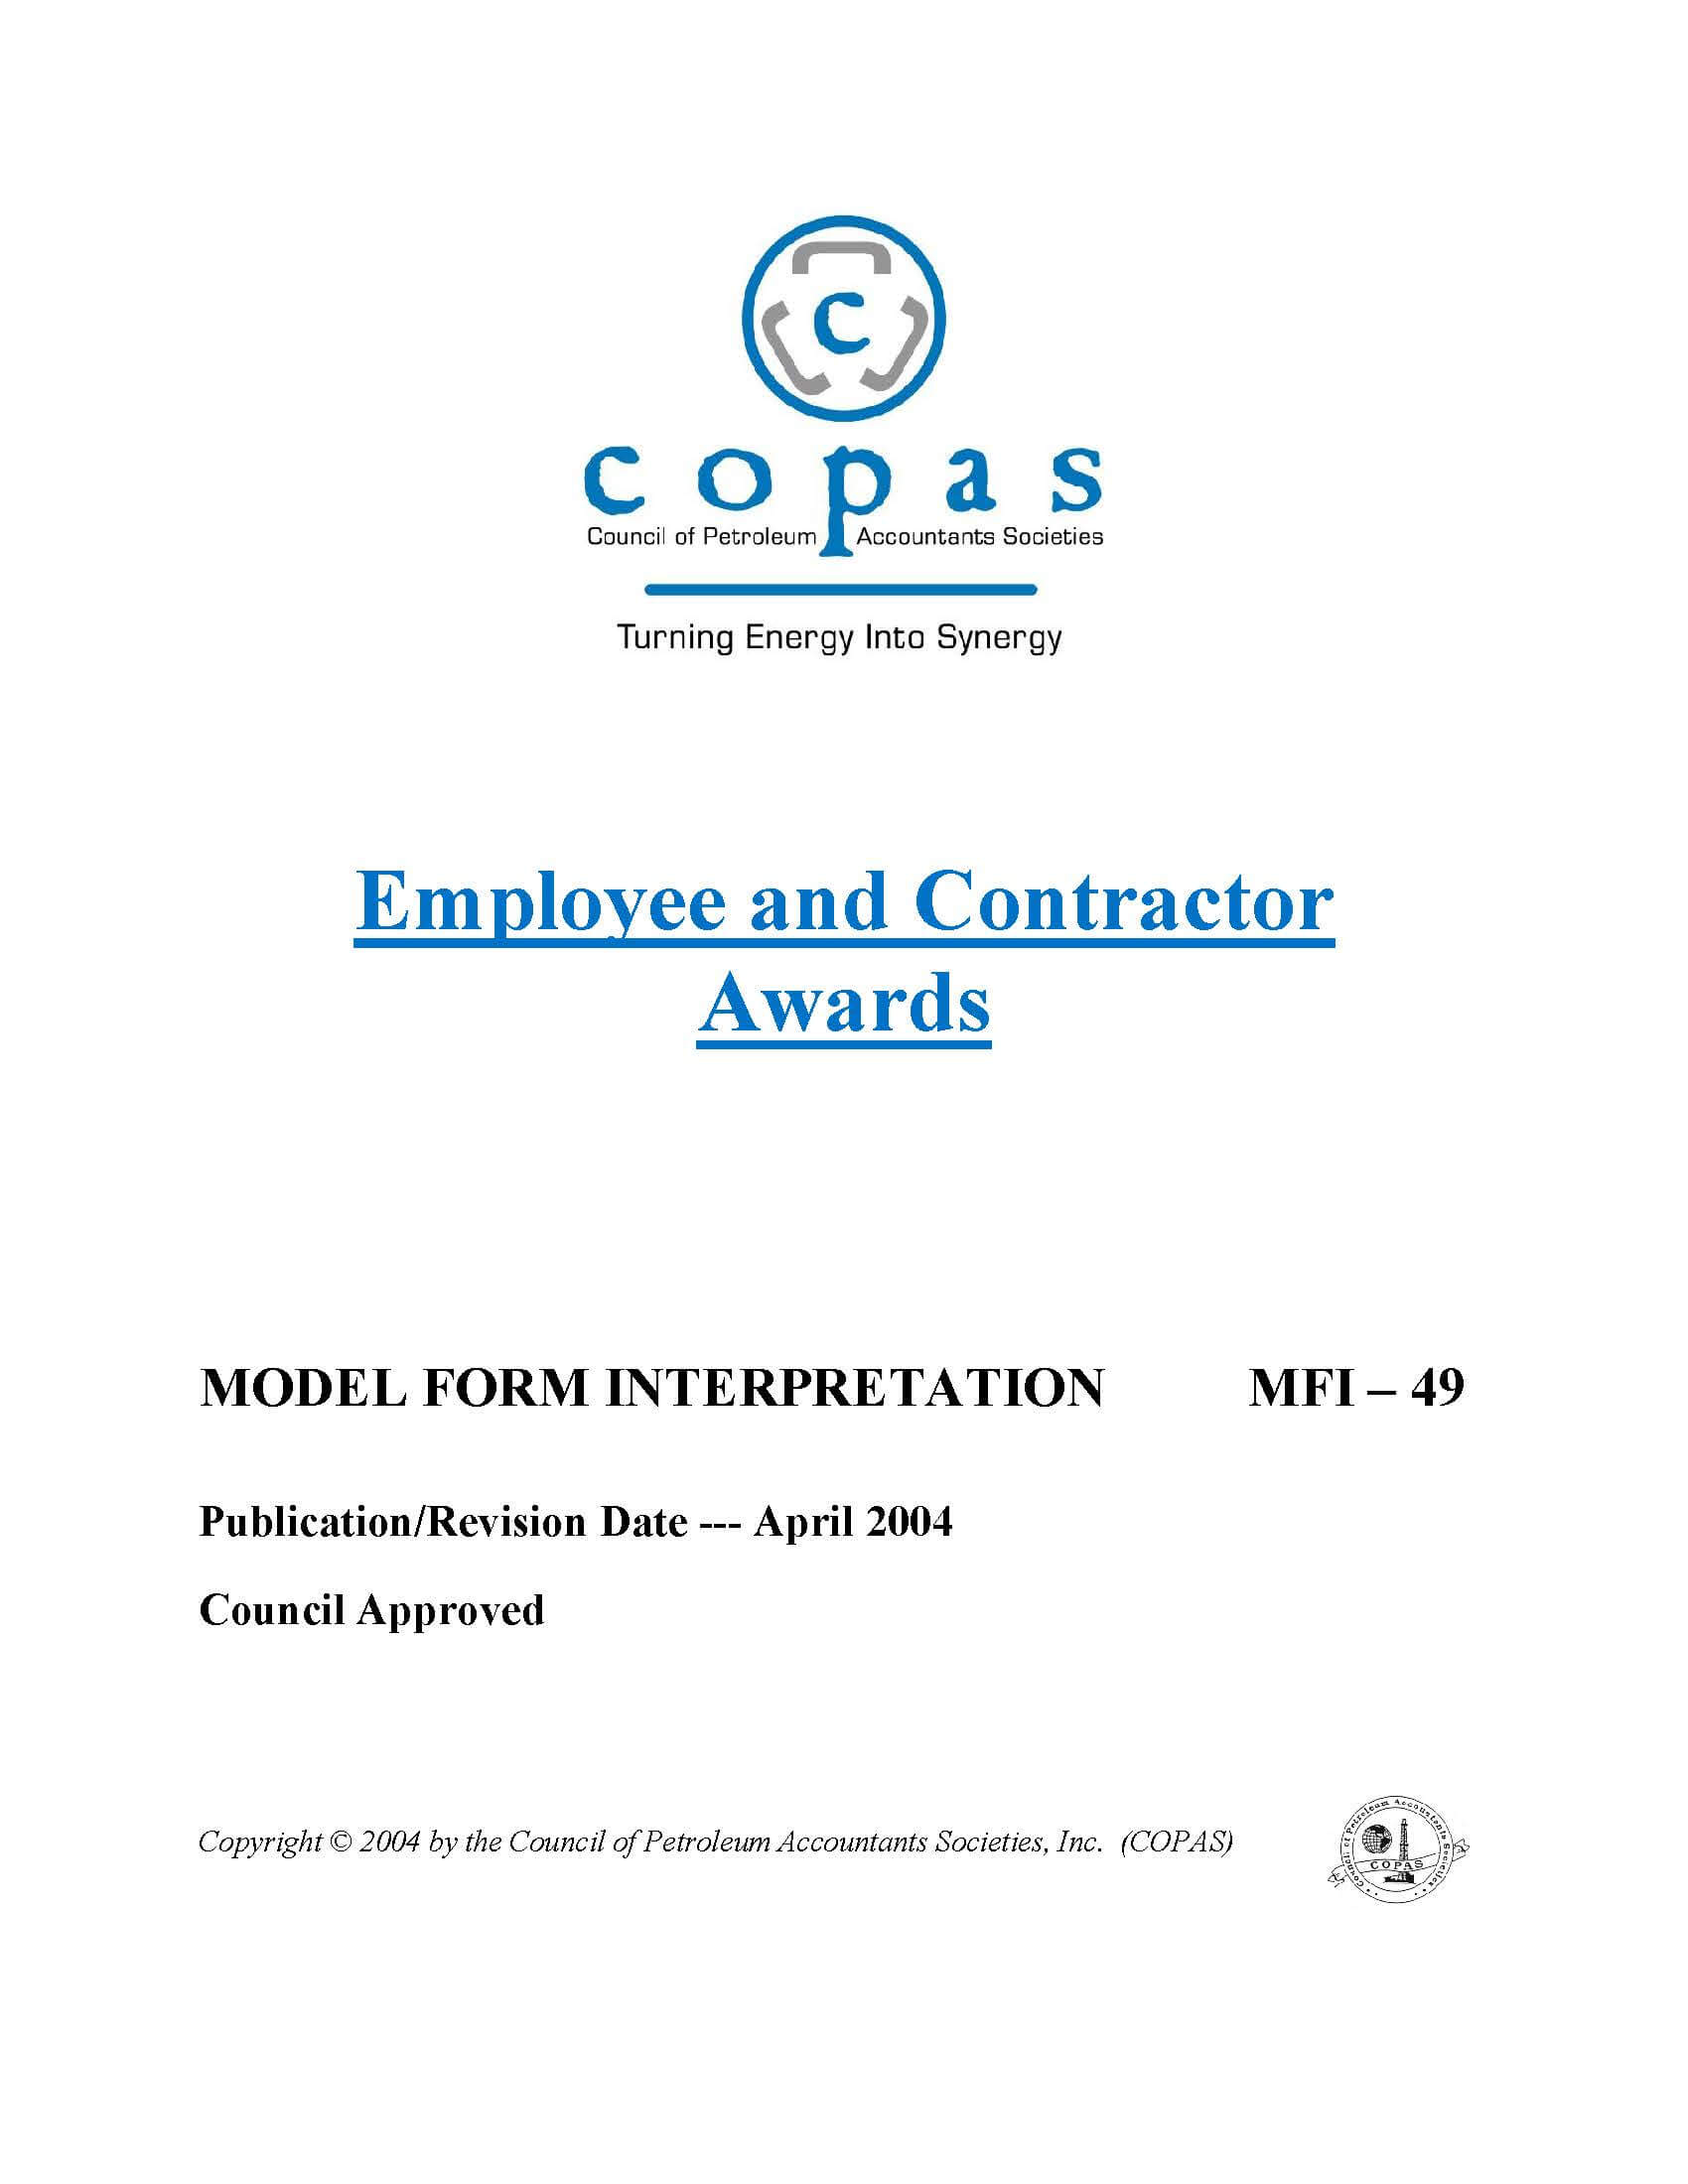 MFI-49 Employee and Contractor Awards